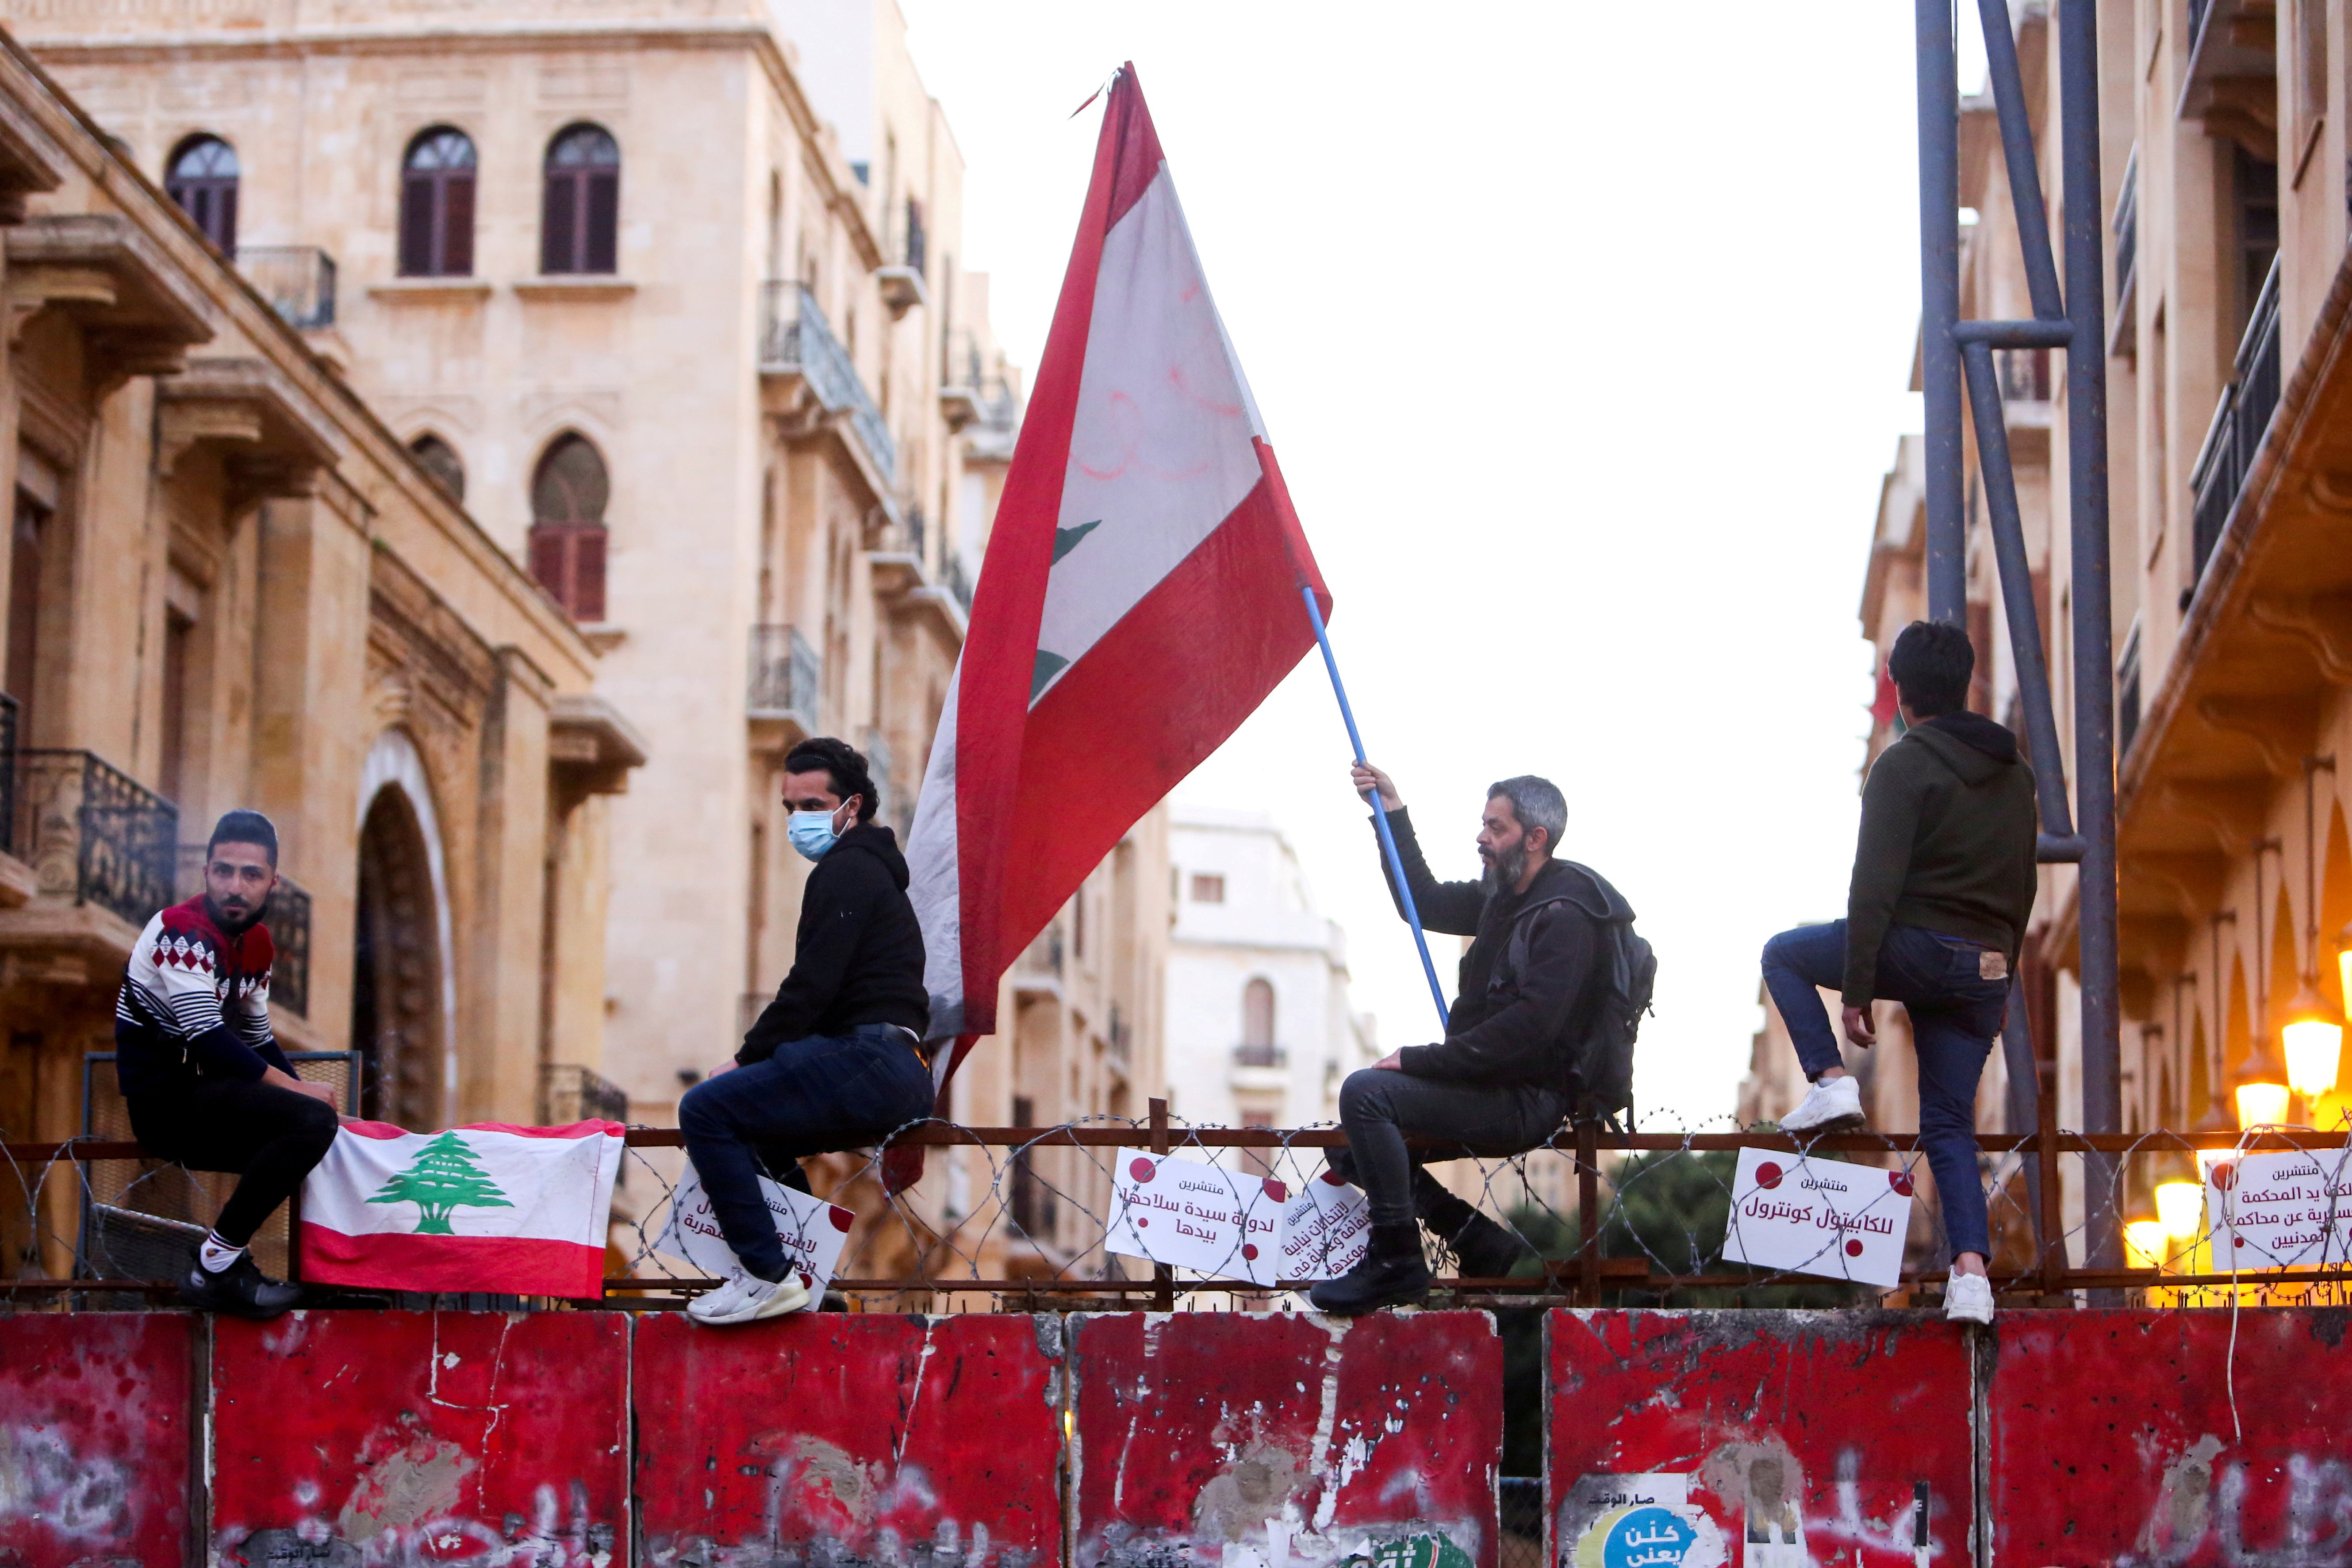 A demonstrator holds a Lebanese flag during a protest against the fall in Lebanese pound currency and mounting economic hardships earlier this month